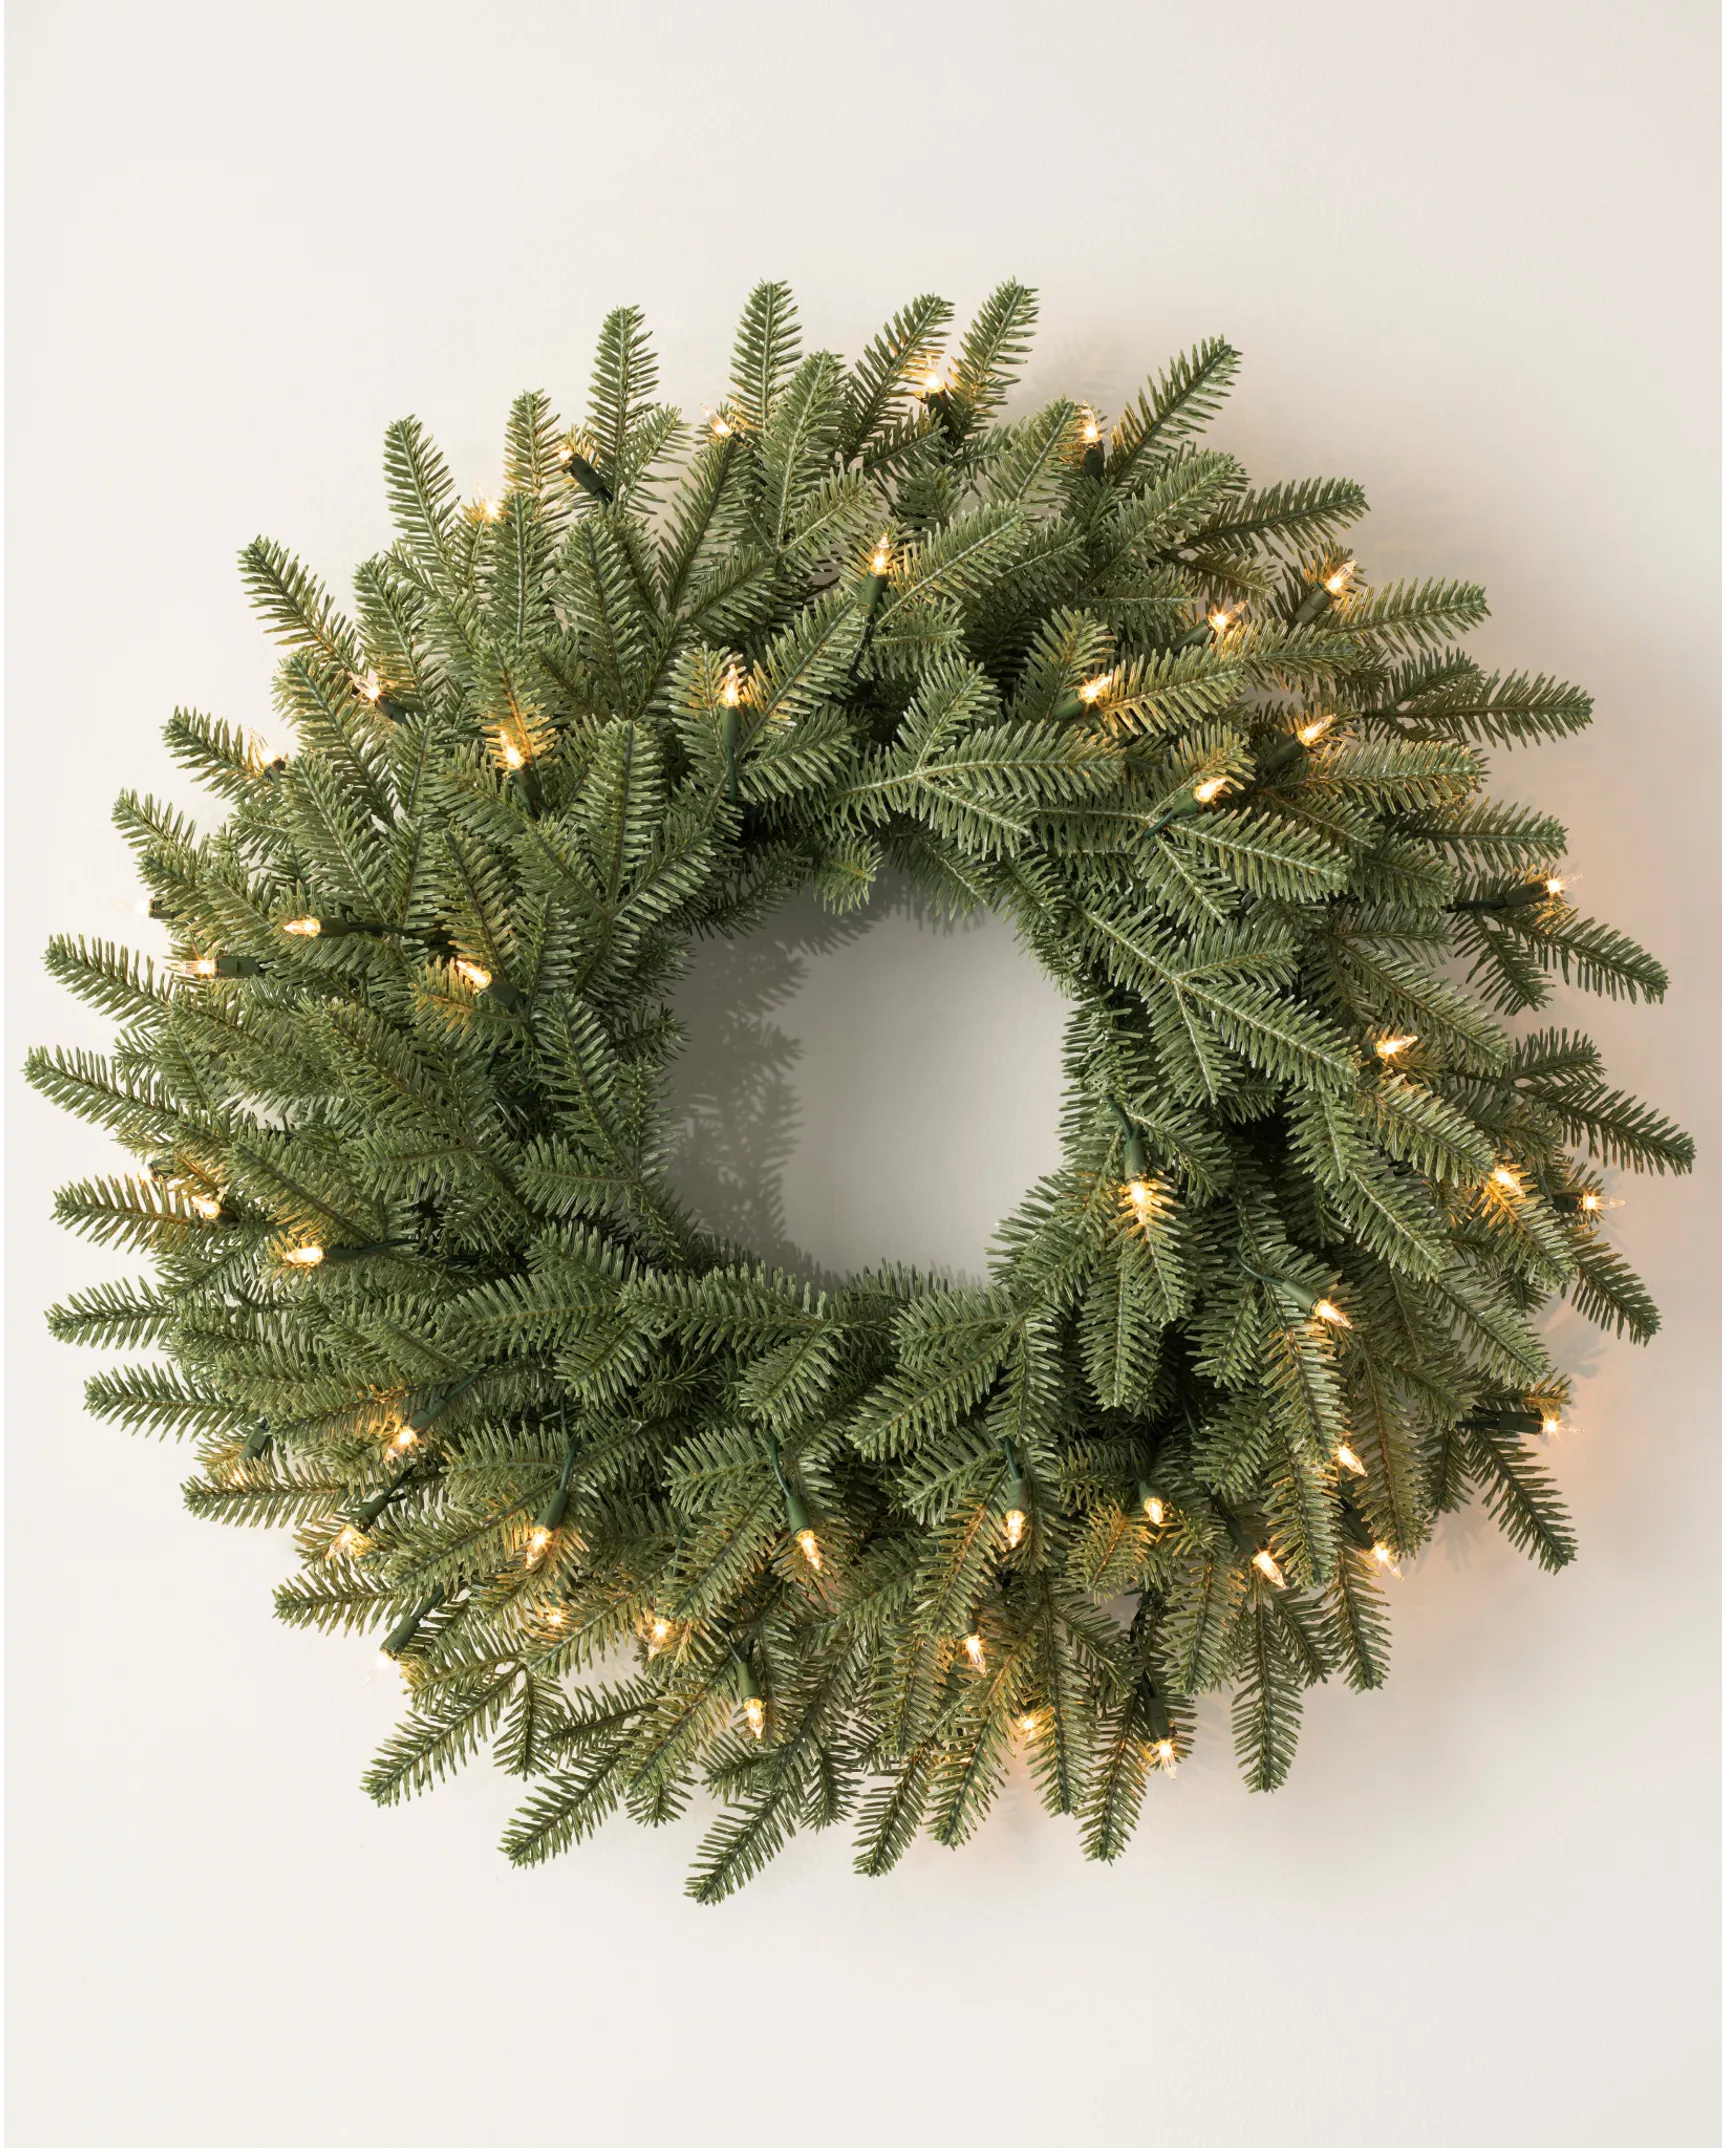  Simplify 24 Inch Wreath Bags, 2 Pack